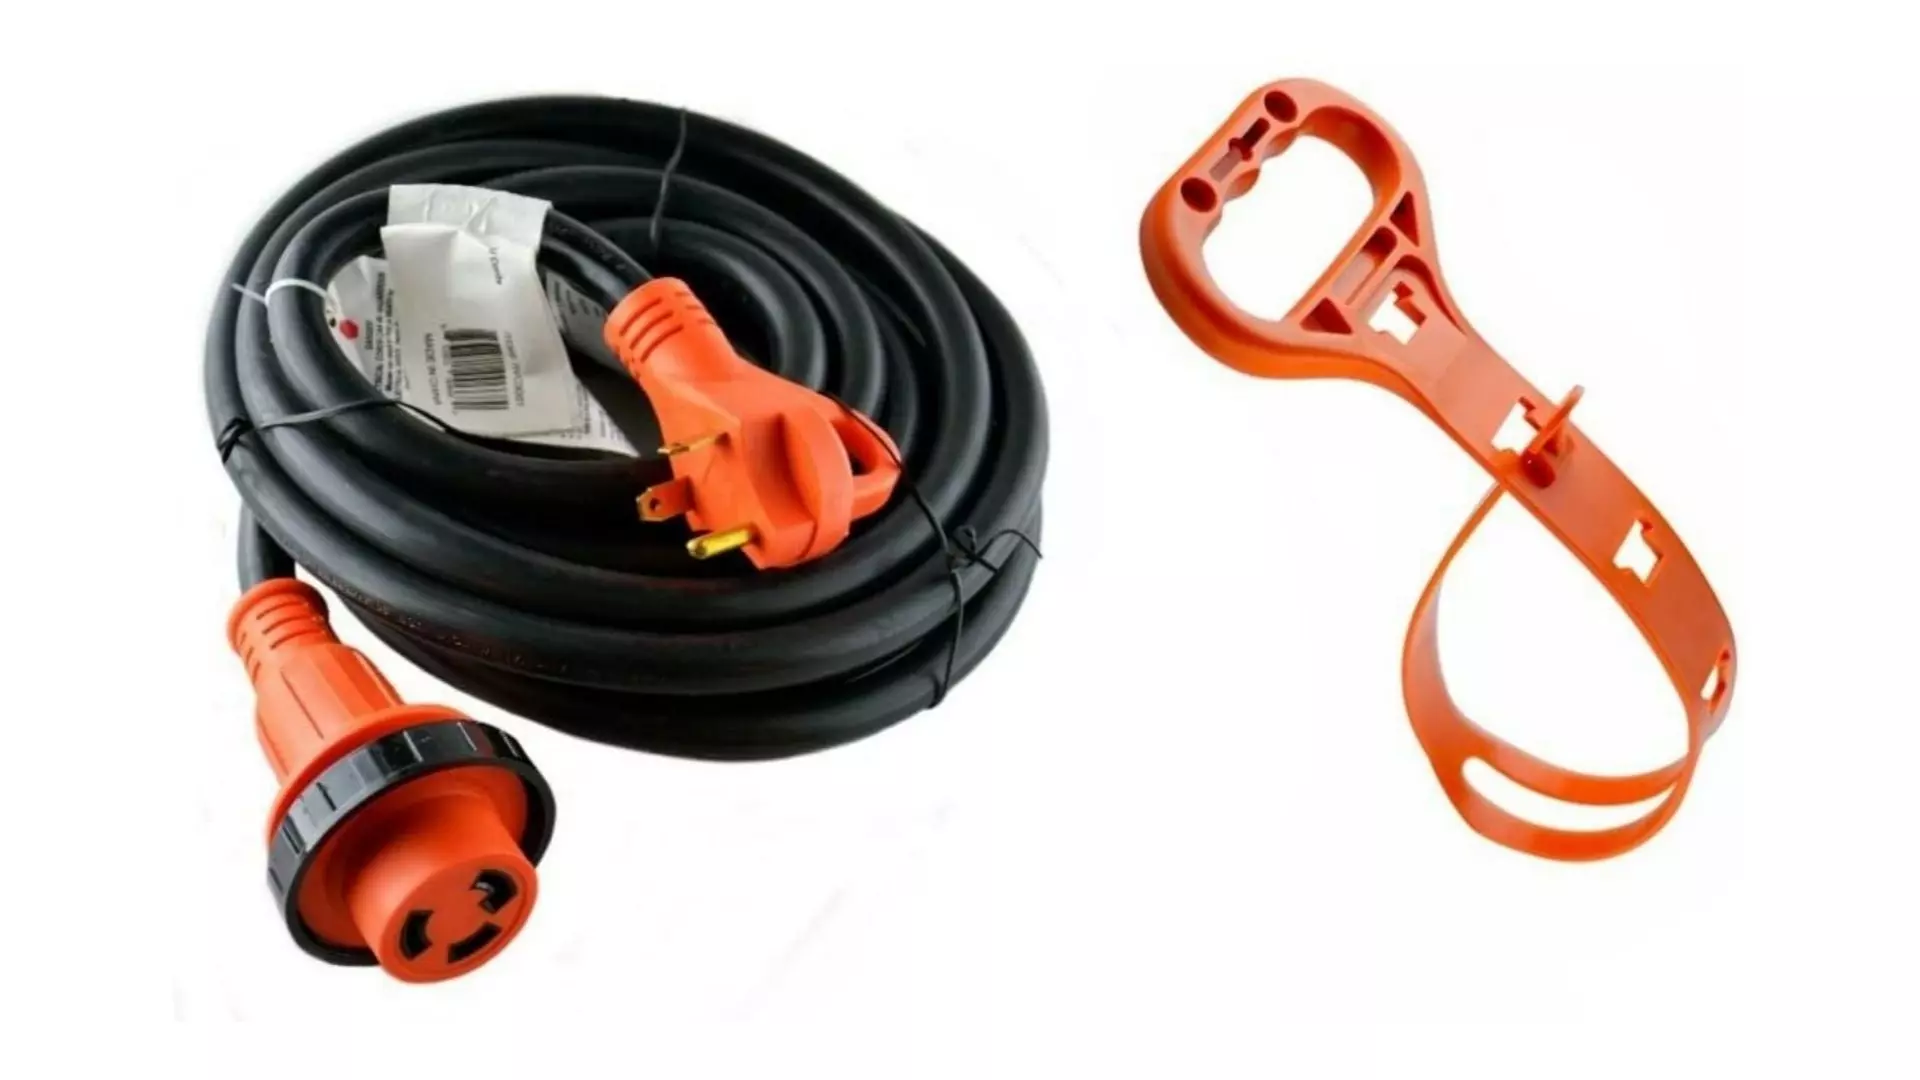 GoWise RVC3002 Power RV Extension Cord